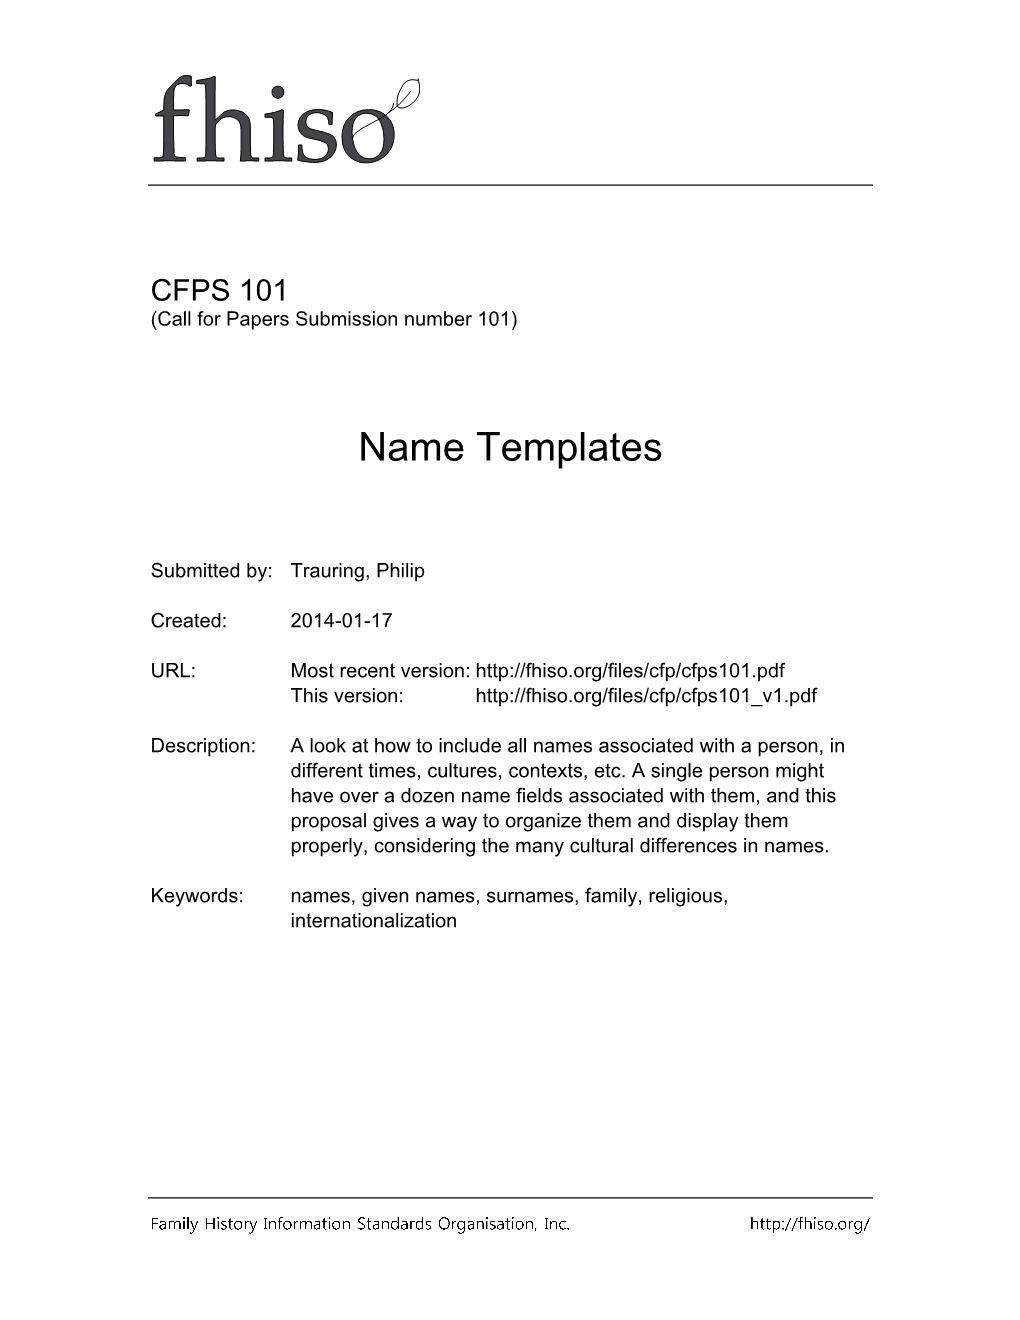 FHISO CFPS 101: Name Templates